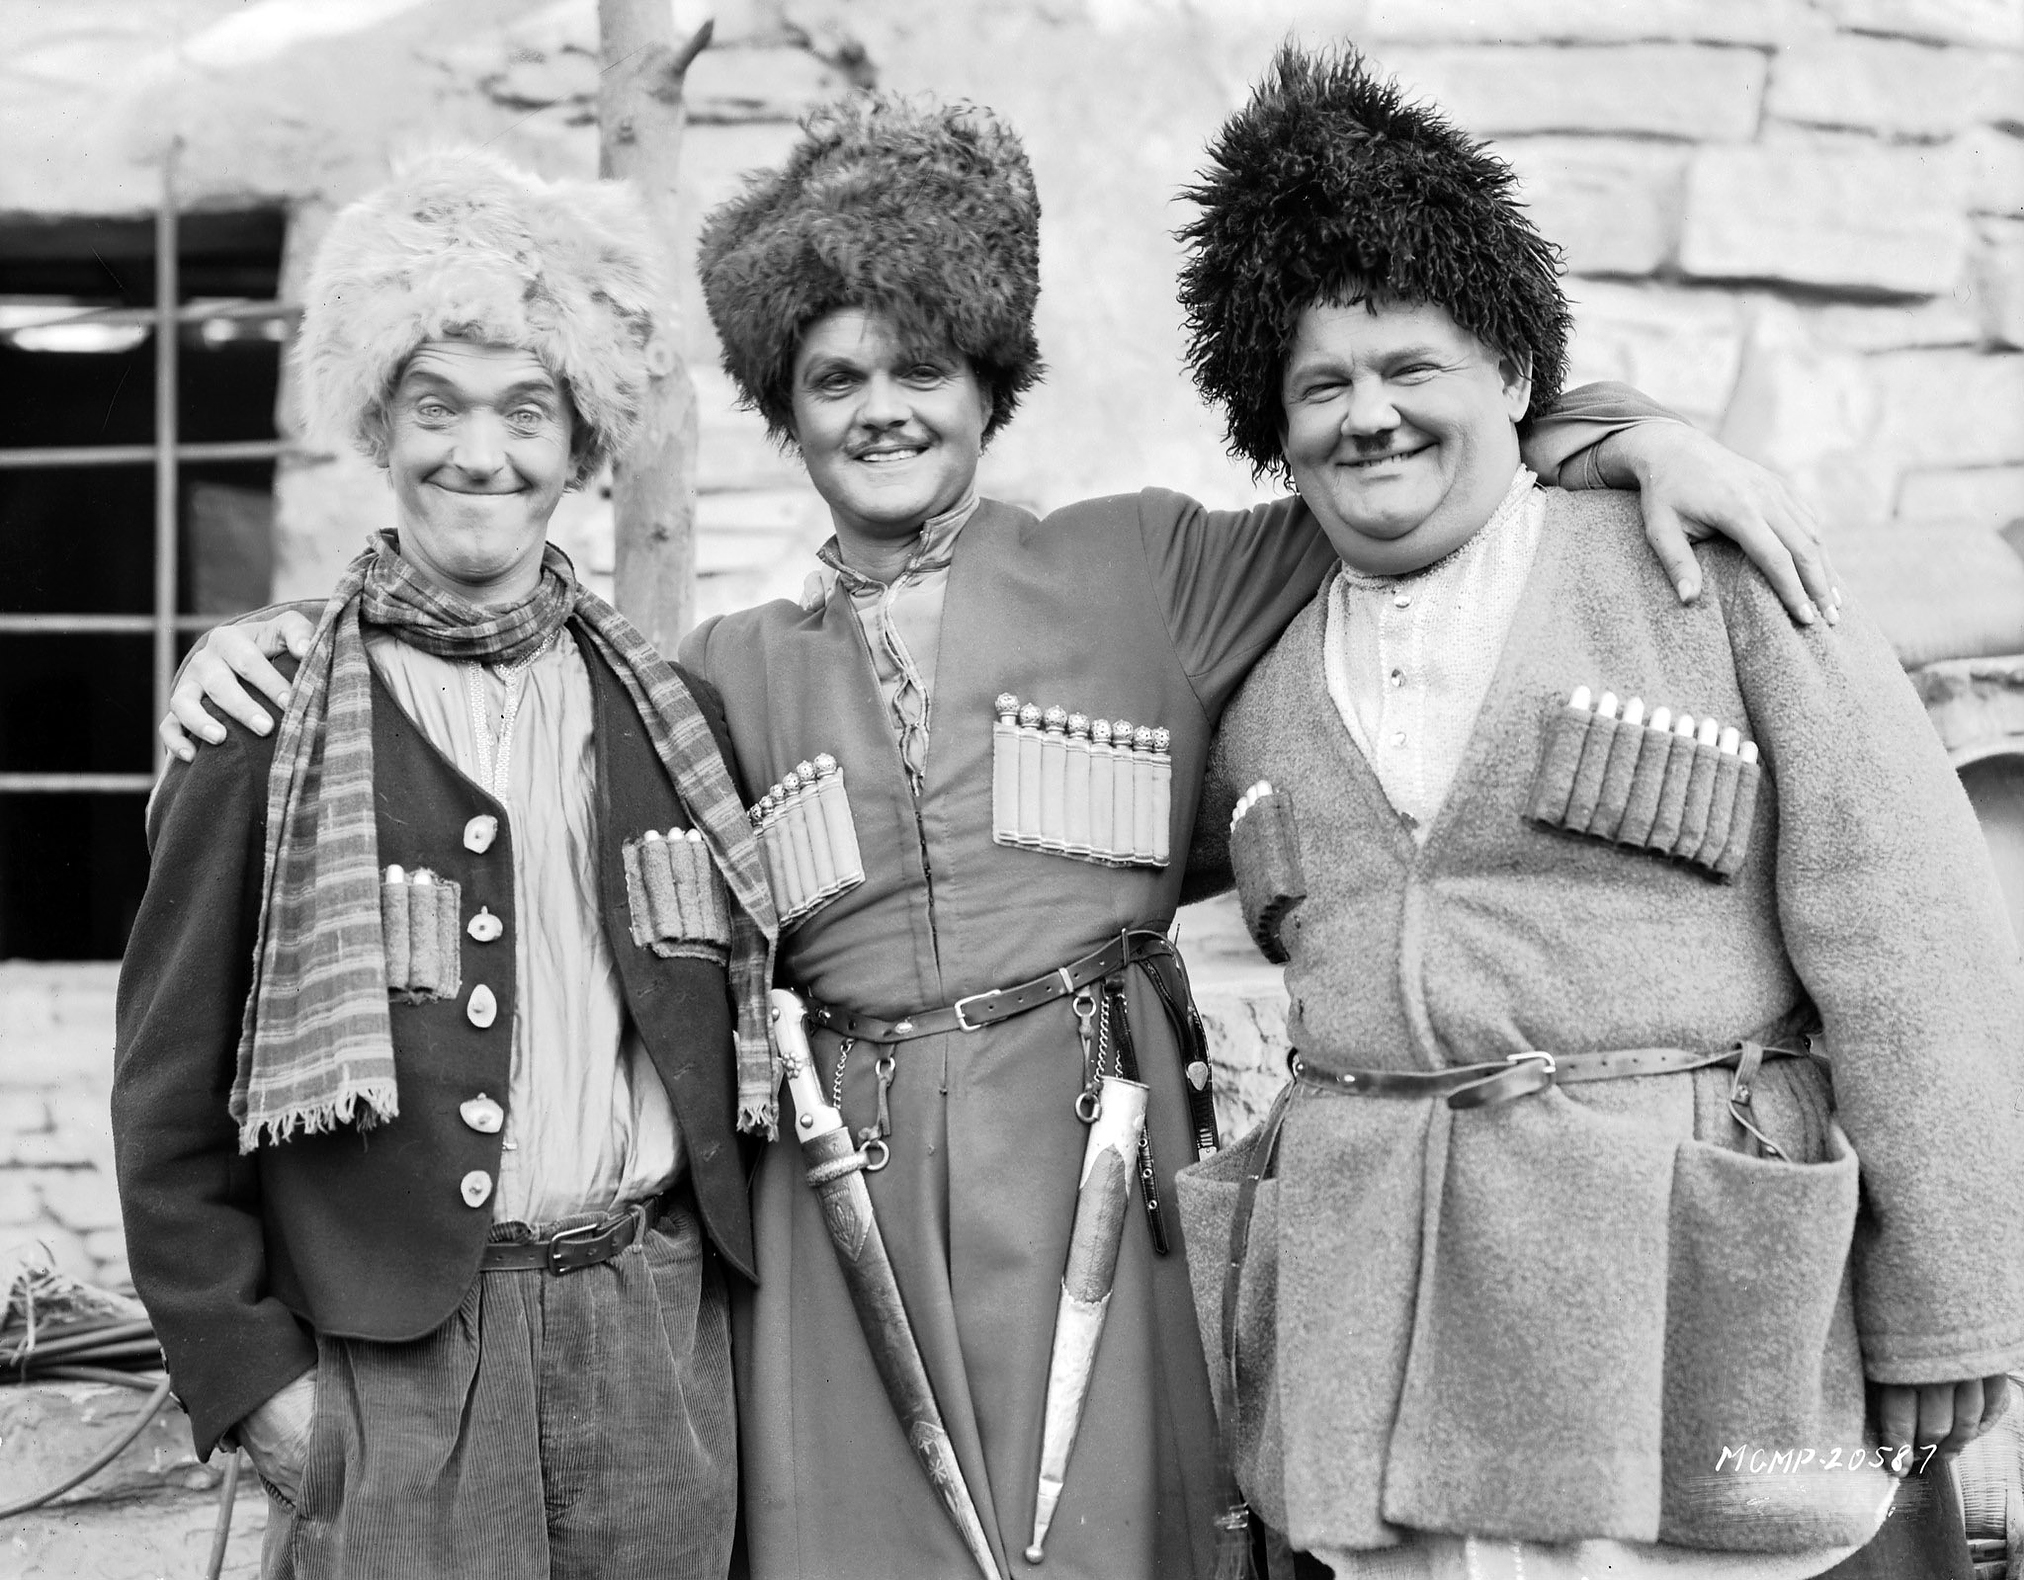 From left to right, Stan Laurel, Lawrence Tibbett and Oliver Hardy dressed as Russians for their roles in 'The Rogue Song', directed by Lionel Barrymore and Hal Roach, 1929.